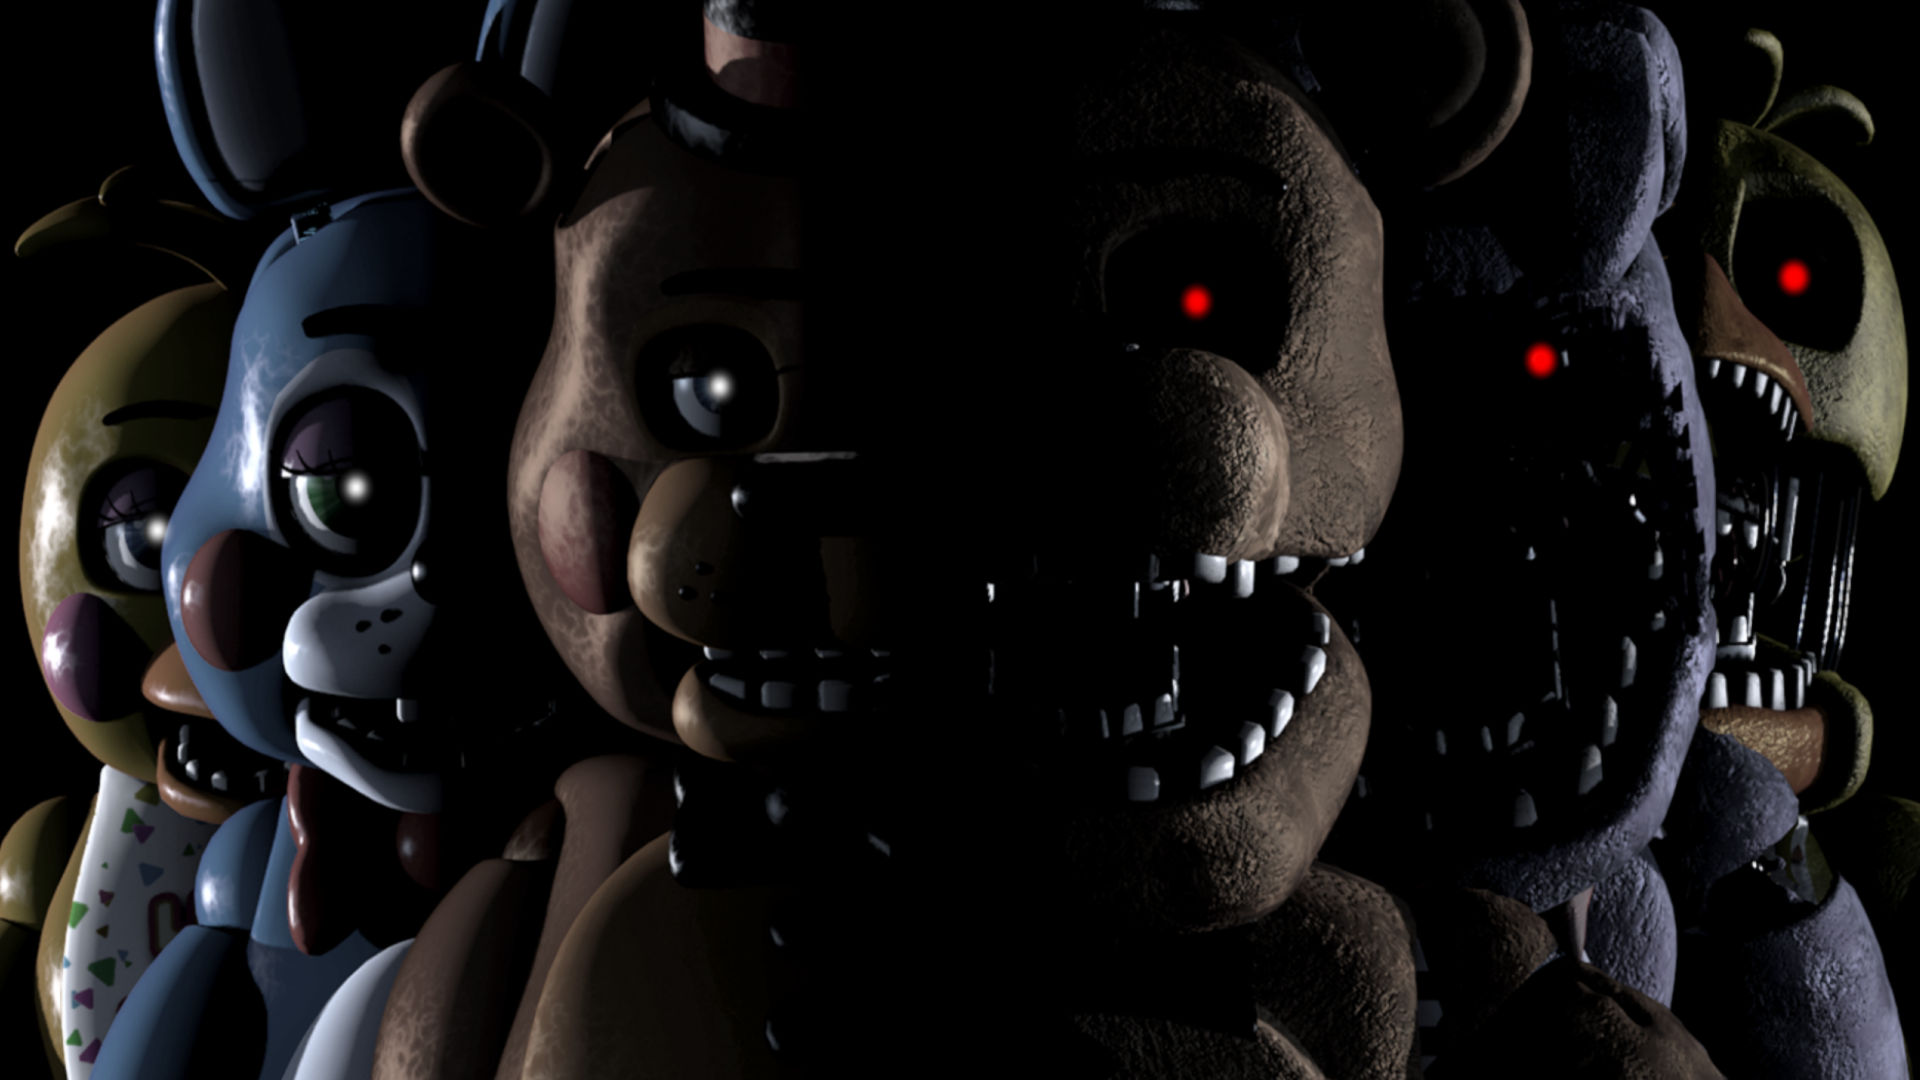 Five Nights at Freddy's 2 - DEMO APK for Android - Download